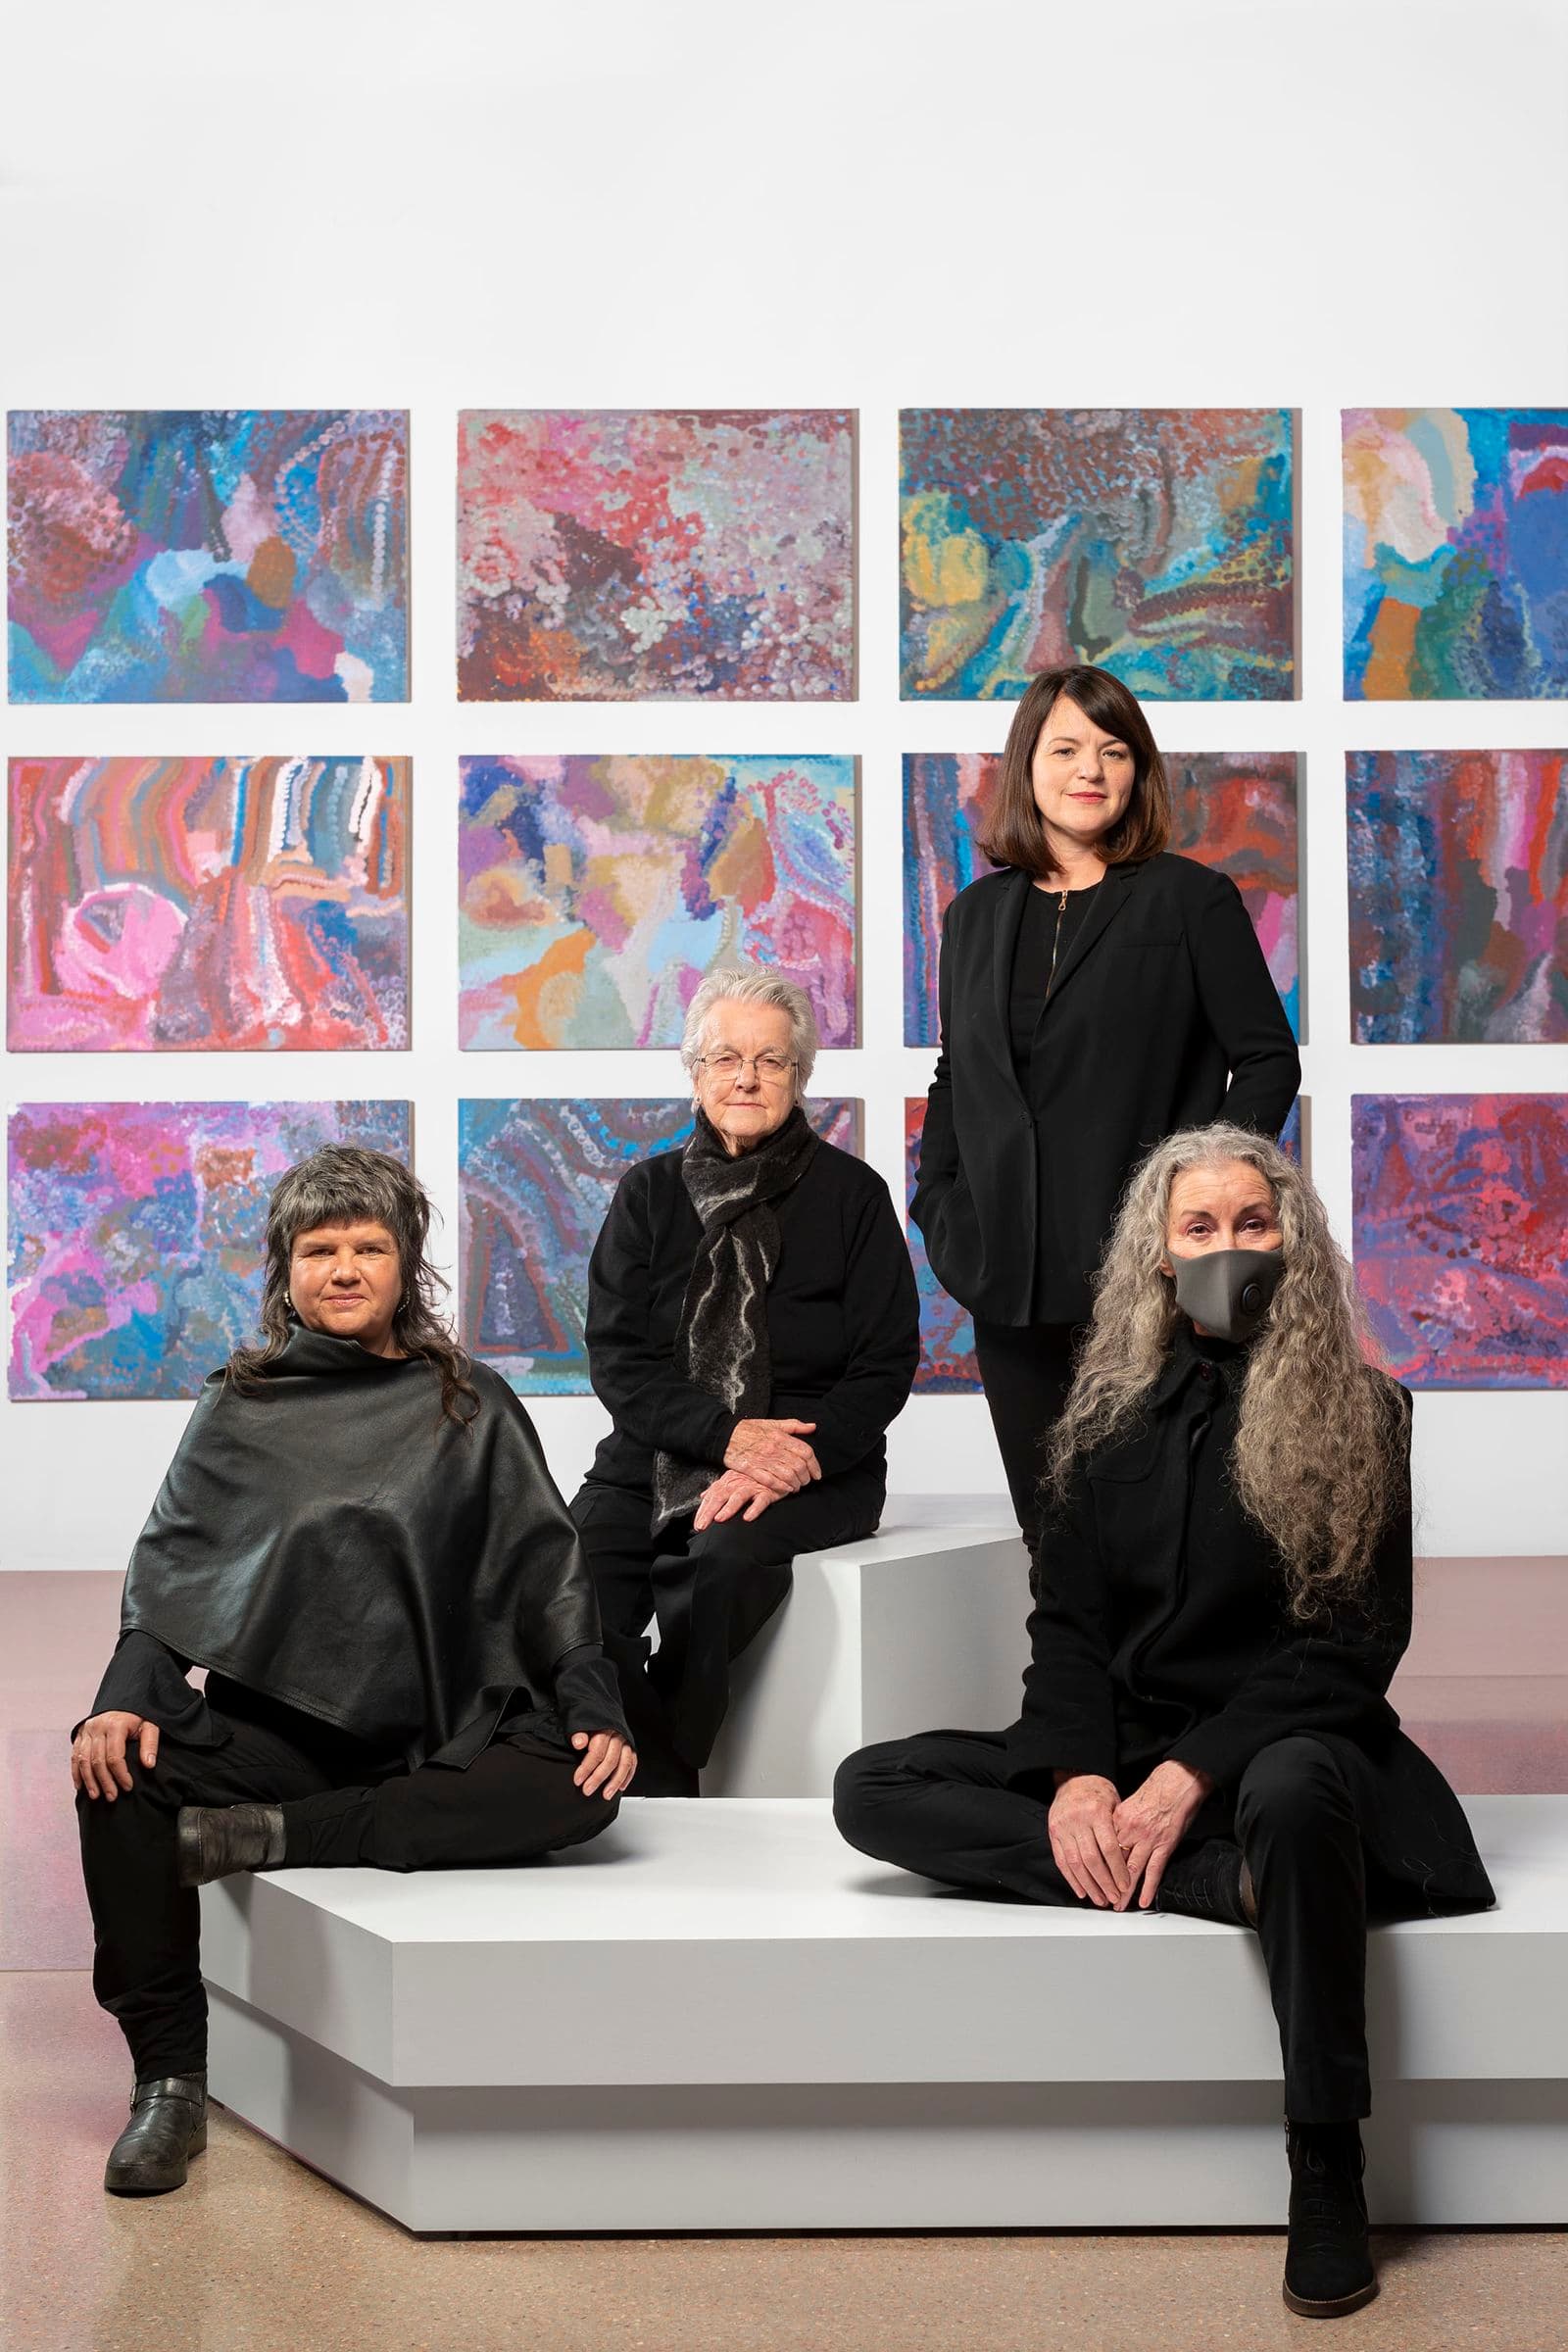 Four women sit against a series of colourful paintings.